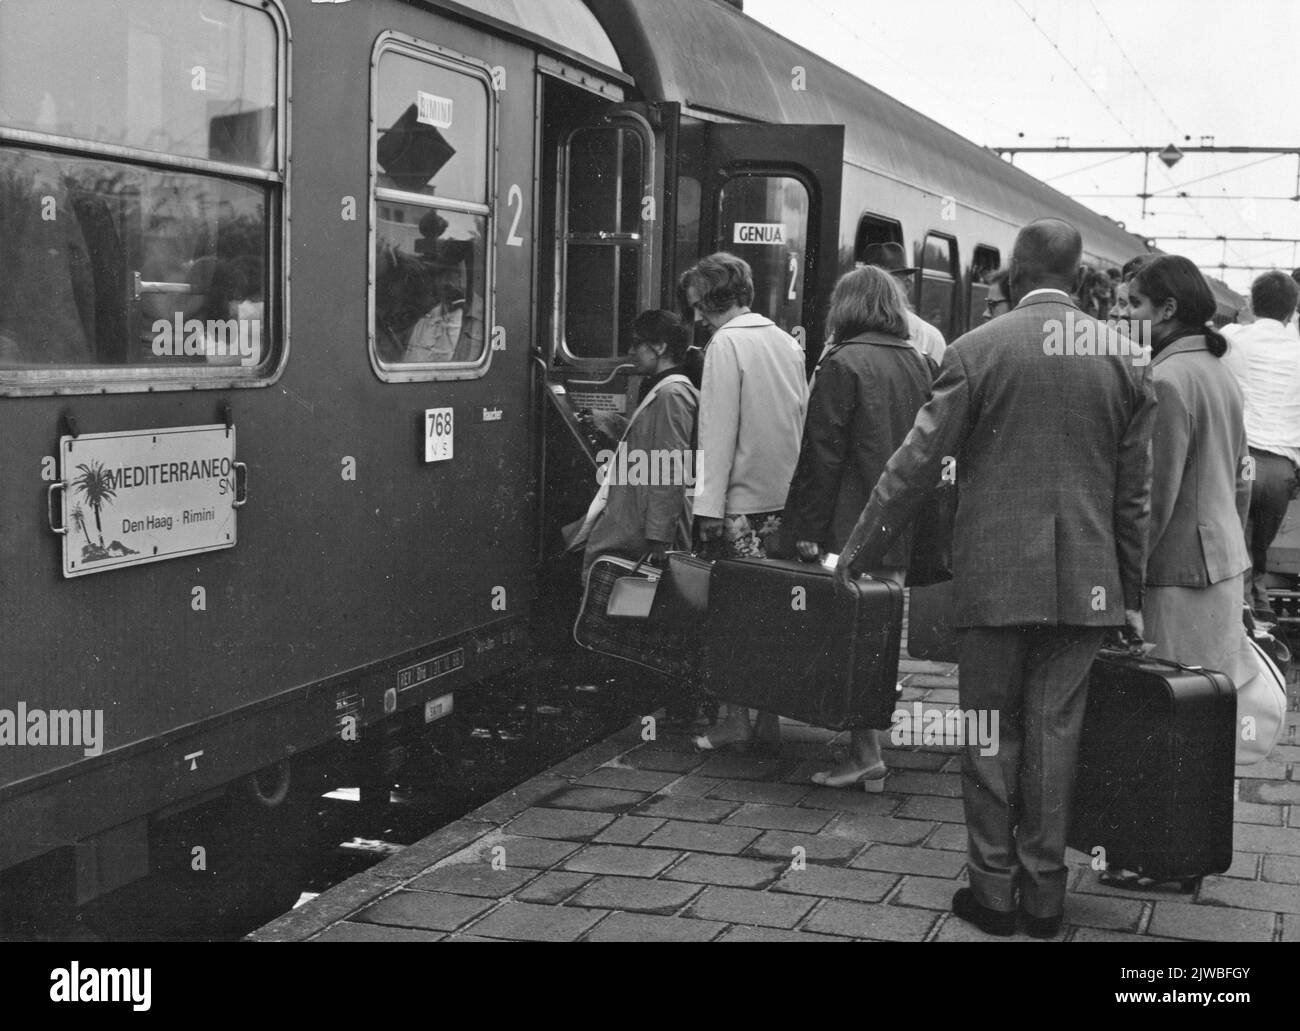 Image of boarding train passengers in the Mediterraneo from The Hague to Rimini at the N.S. station Venlo in Venlo. Stock Photo